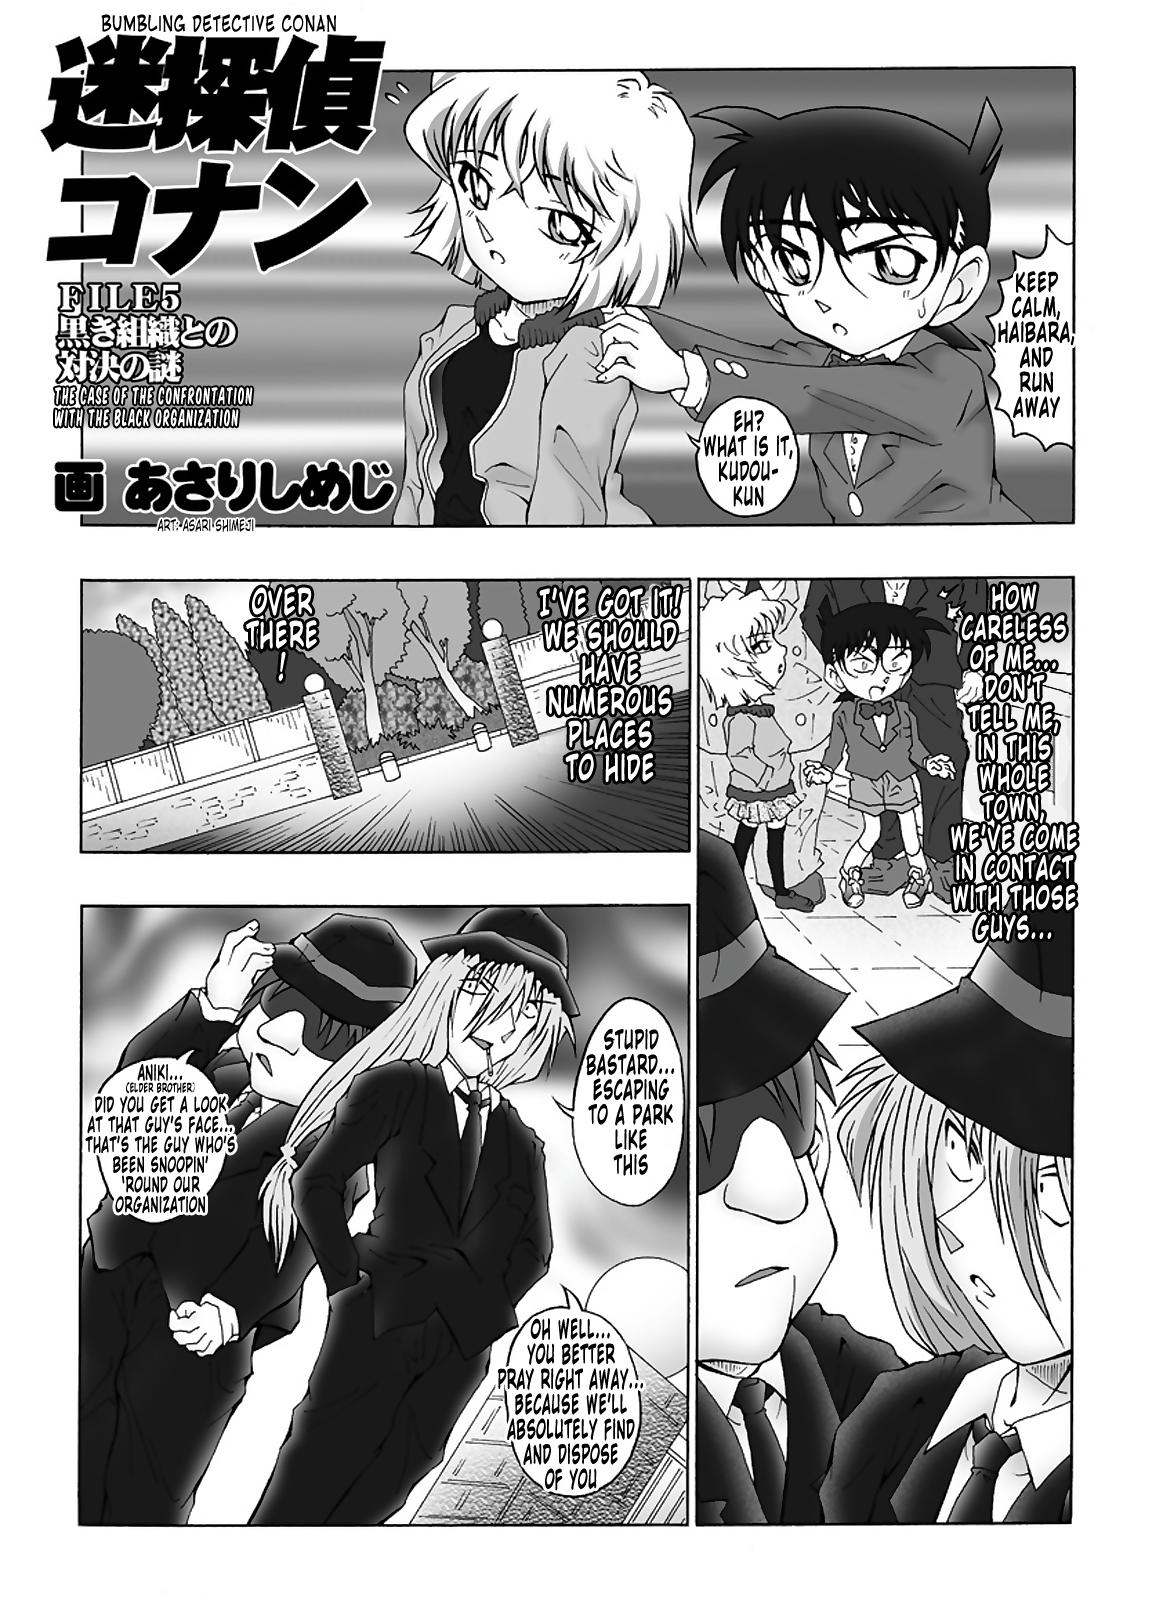 Matures Bumbling Detective Conan - File 5: The Case of The Confrontation with The Black Organiztion - Detective conan Dildo - Page 4